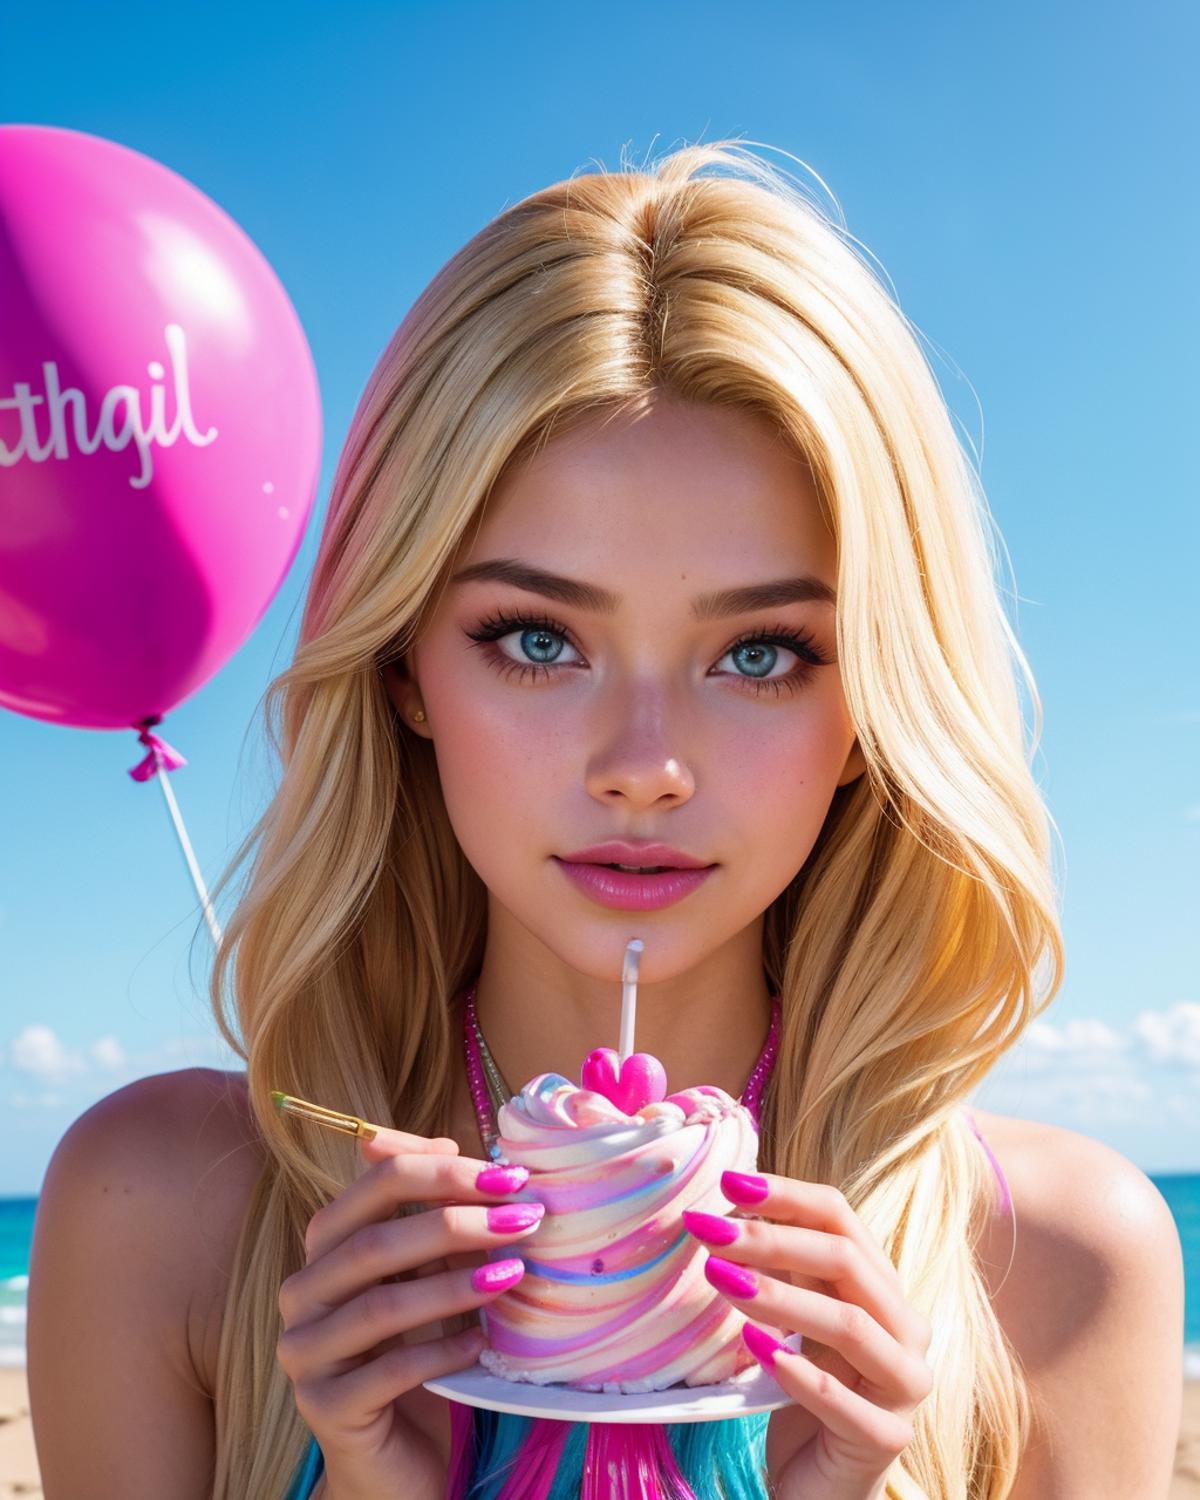 A blonde woman with pink nails and a pink balloon.